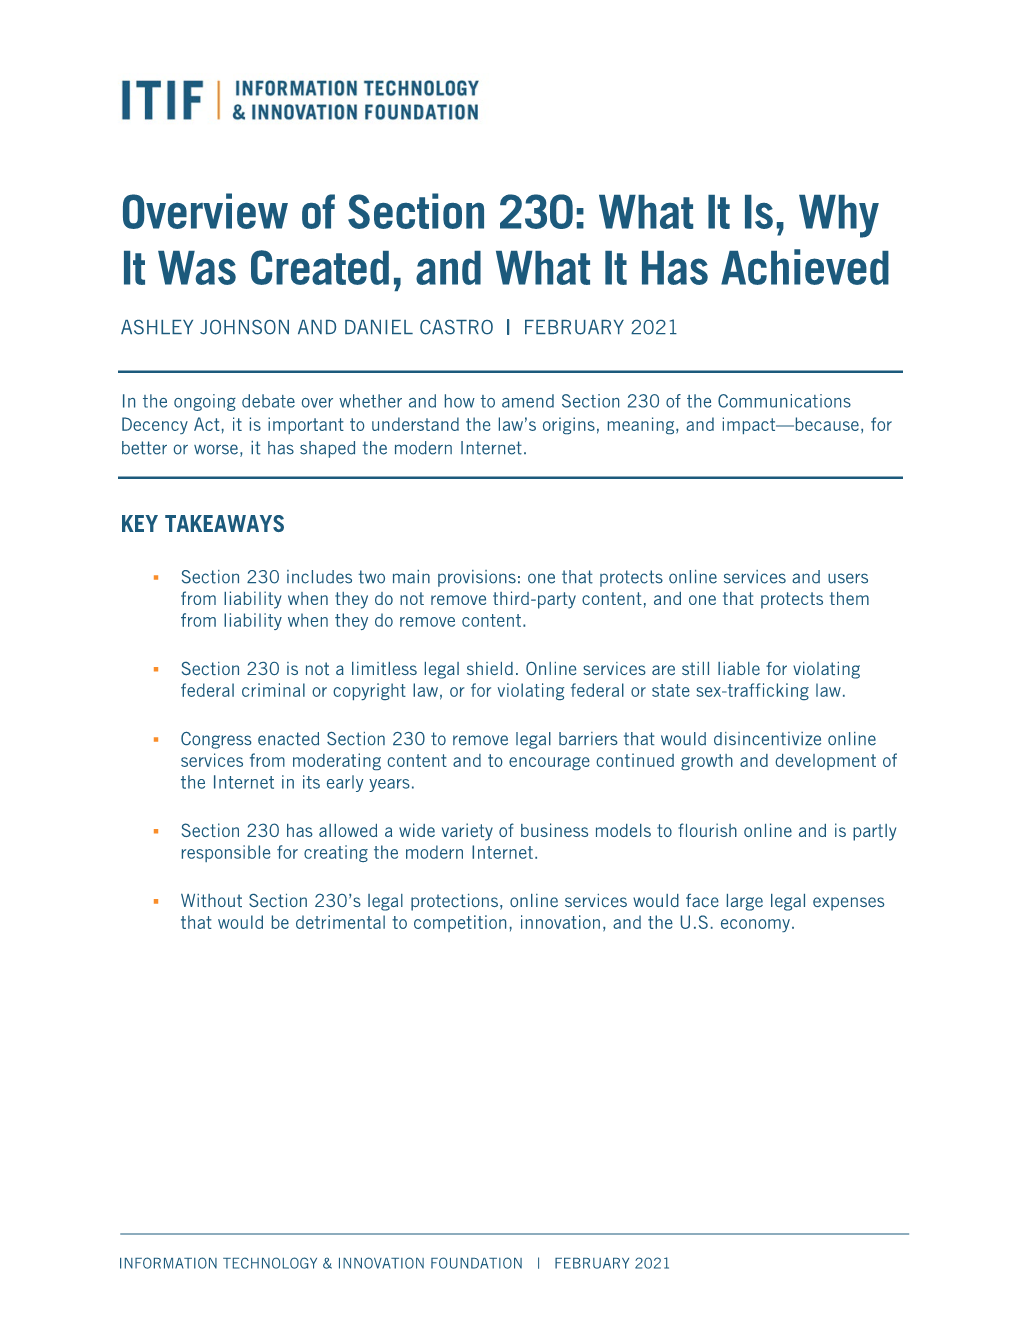 Overview of Section 230: What It Is, Why It Was Created, and What It Has Achieved